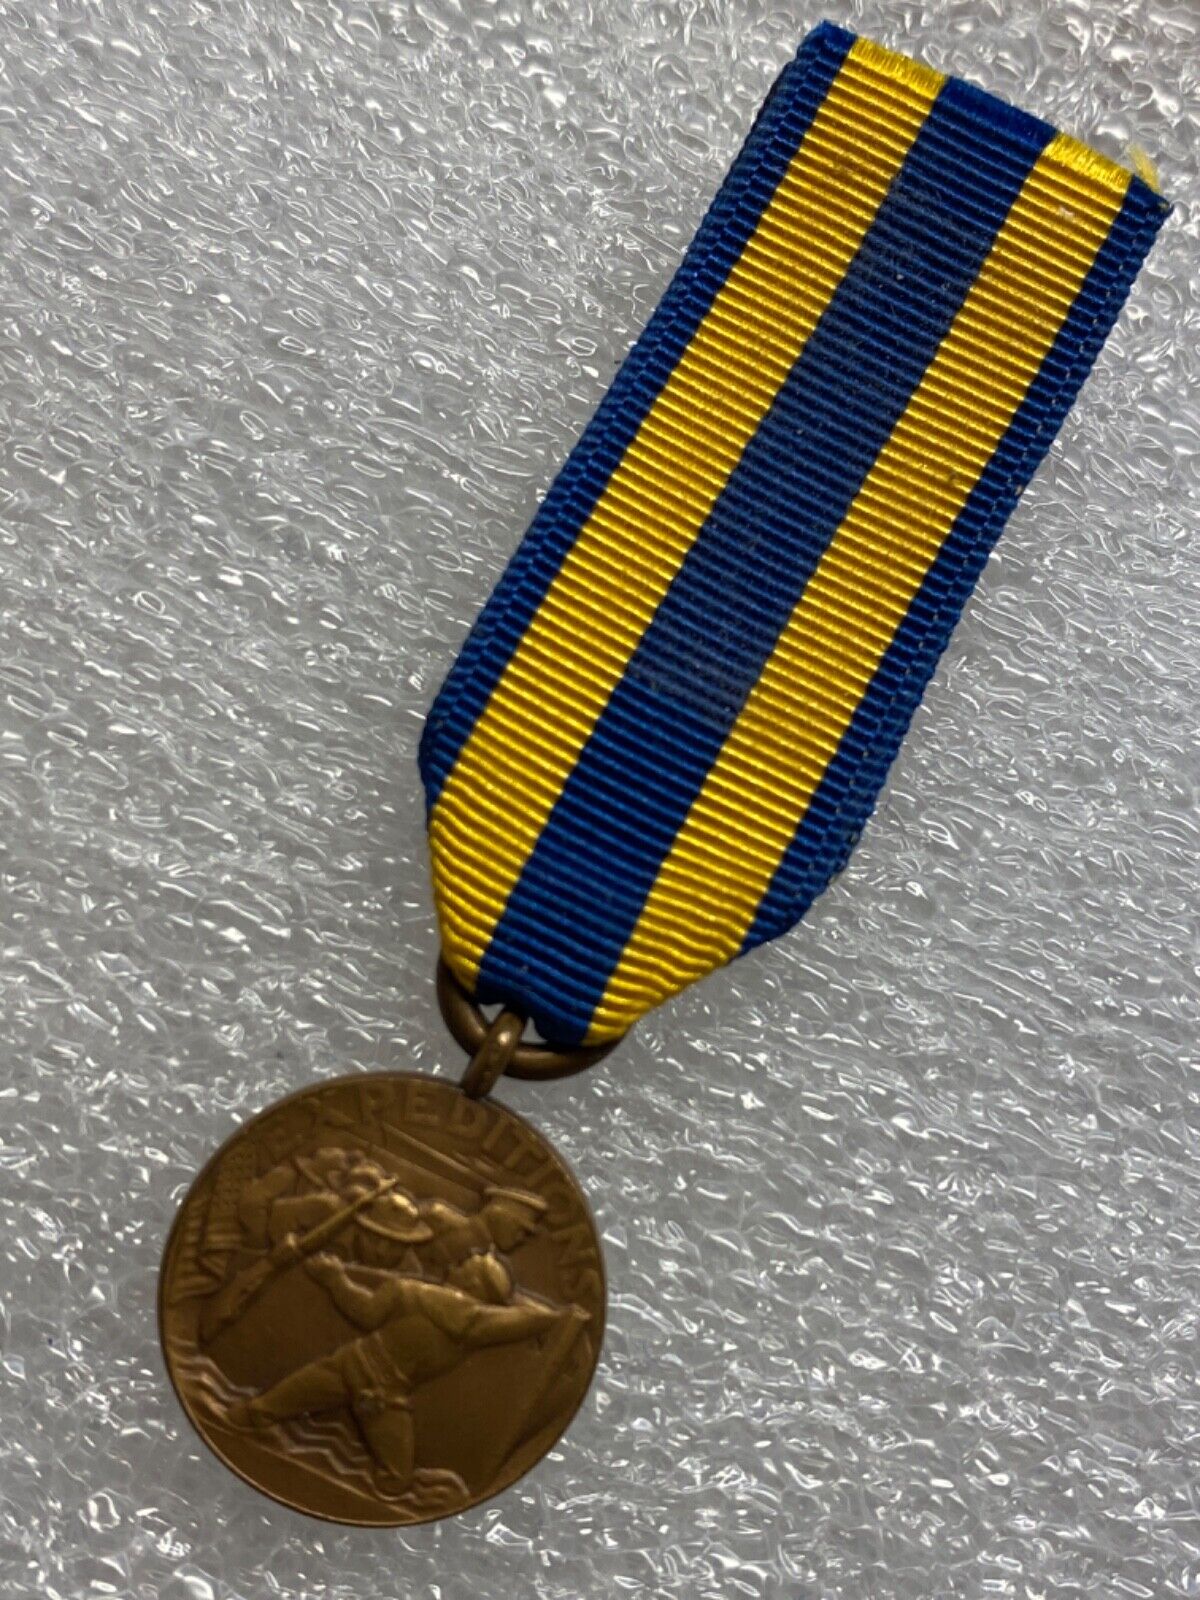 UNITED STATES NAVY, EXPEDITIONARY MEDAL, MINATURE